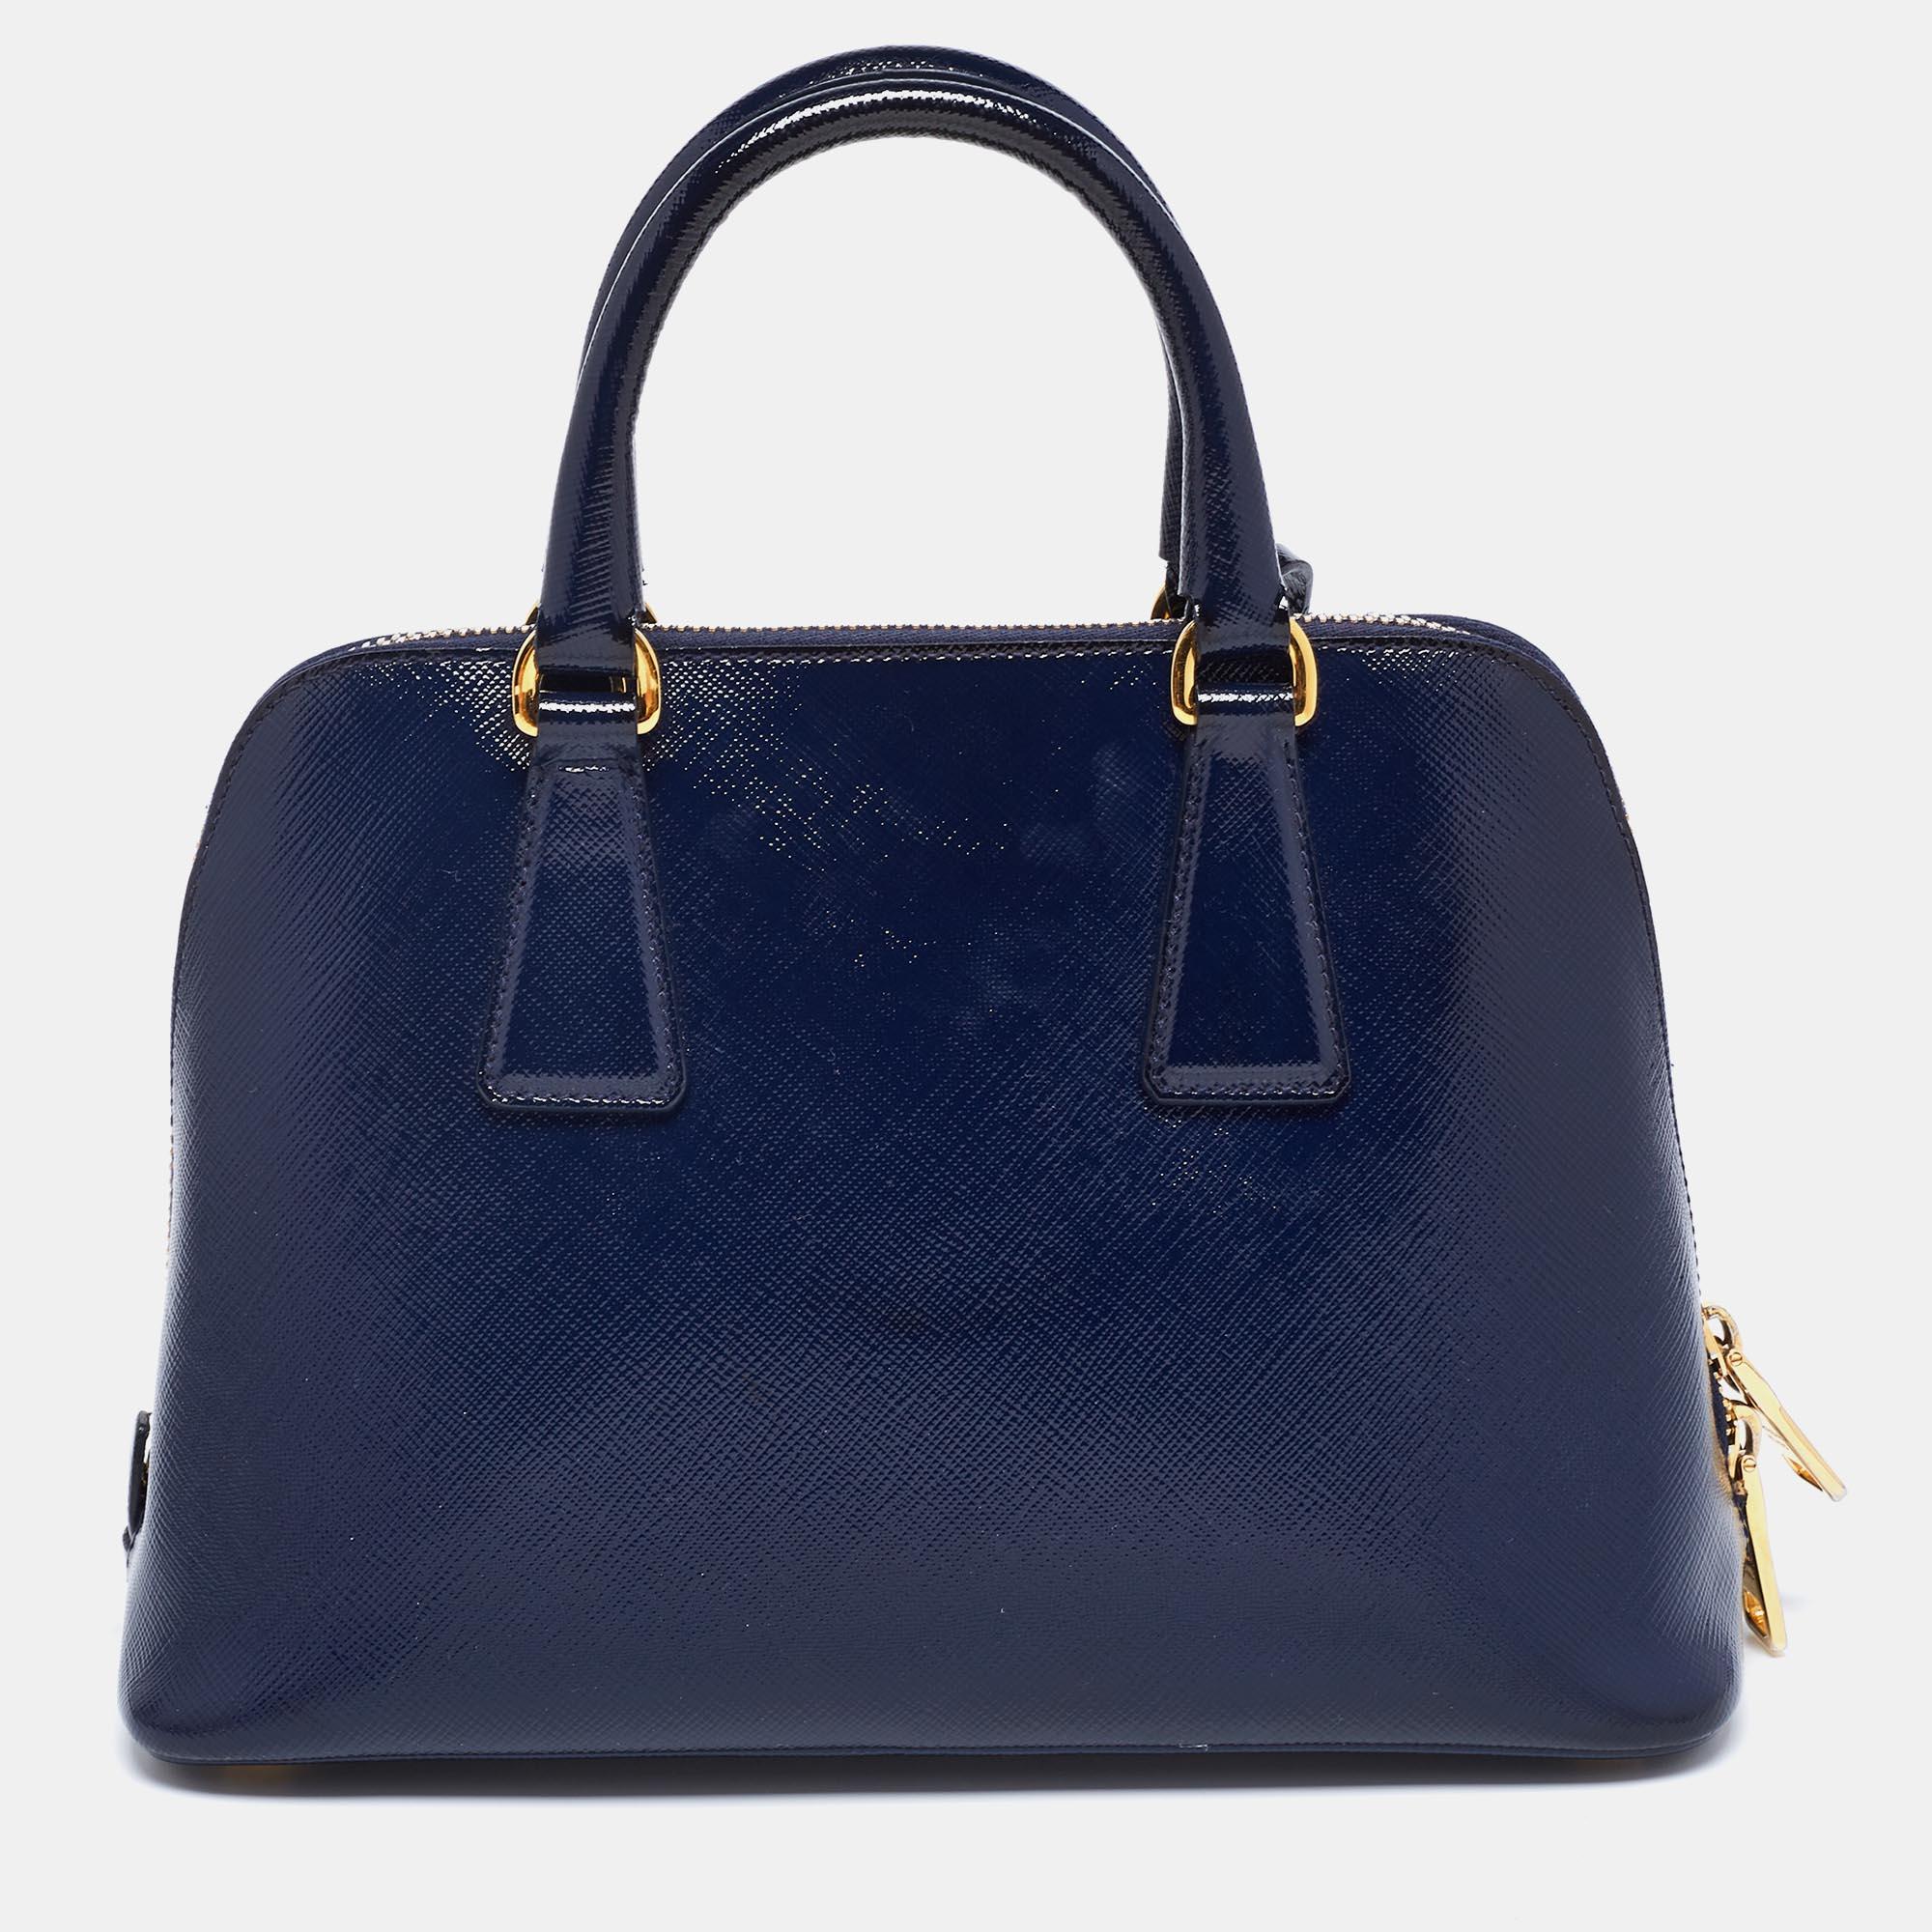 This stunning Promenade tote is high on appeal and style. Dazzling in a classy navy blue shade, the bag is crafted from Saffiano patent leather and features two rolled handles. The zip closure leads way to a nylon interior with enough space for your